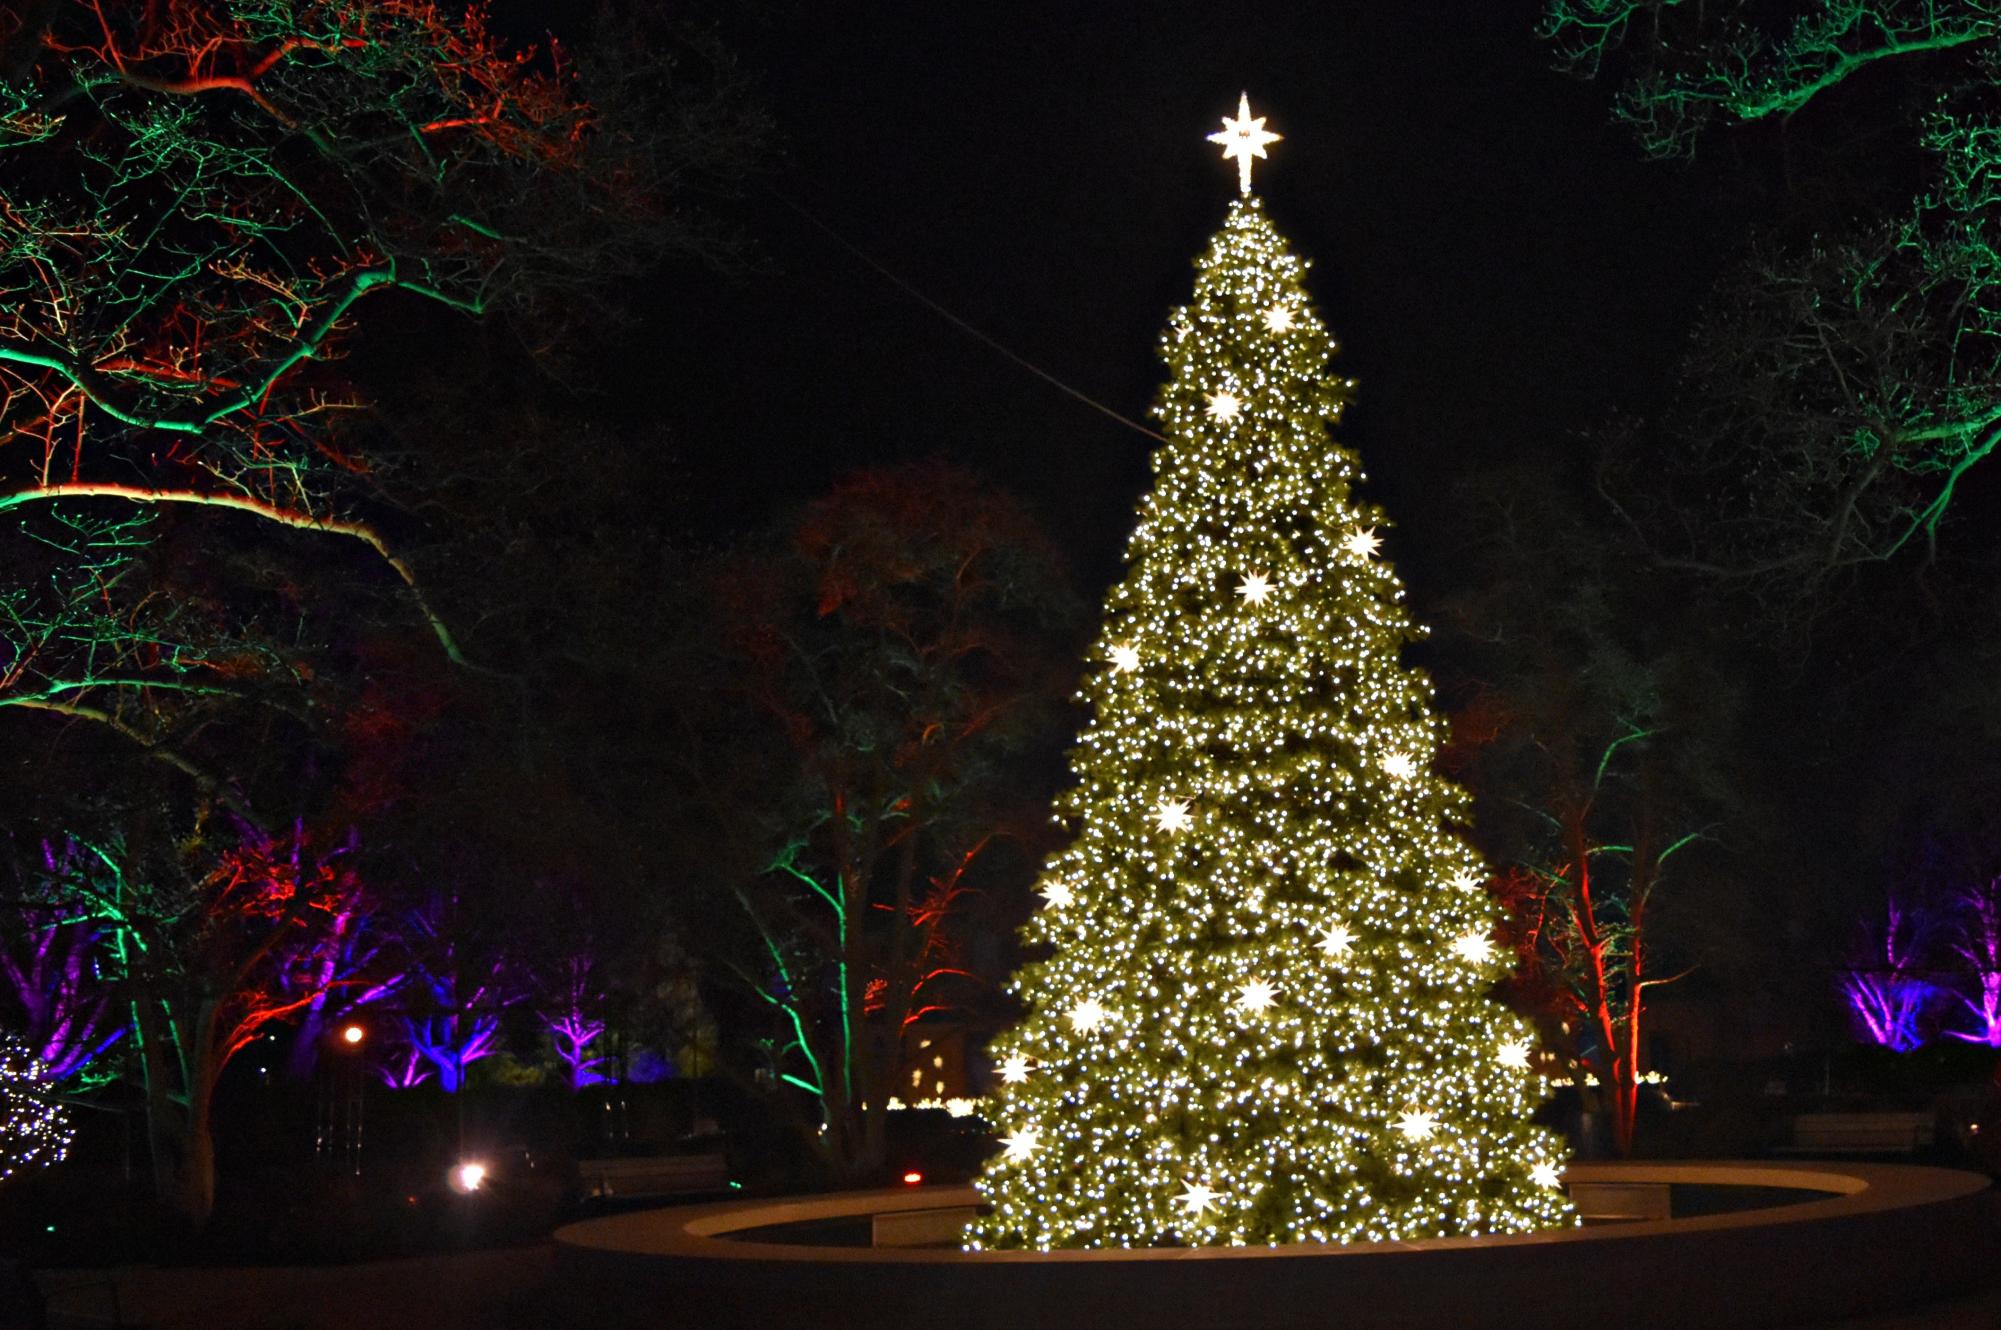 Christmas was in full swing at Cantigny on Dec. 22 during the Winter Spectacular.